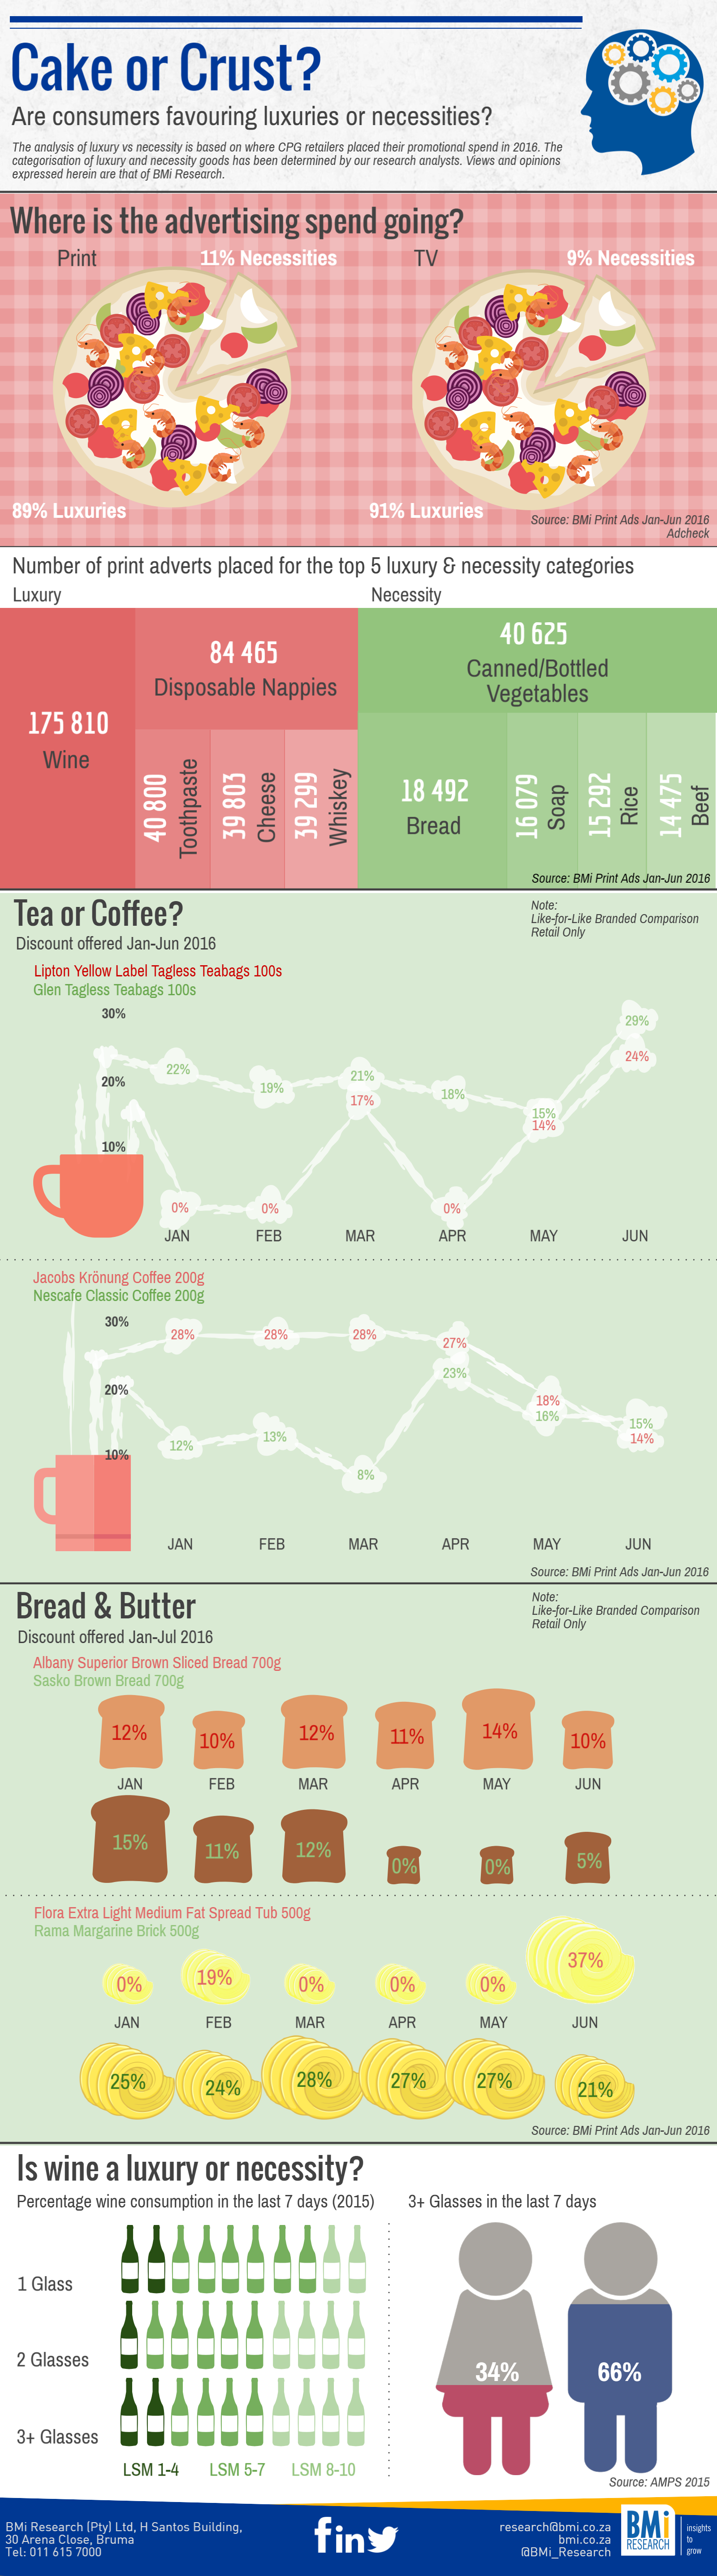 insights-infographic-cake or crust?